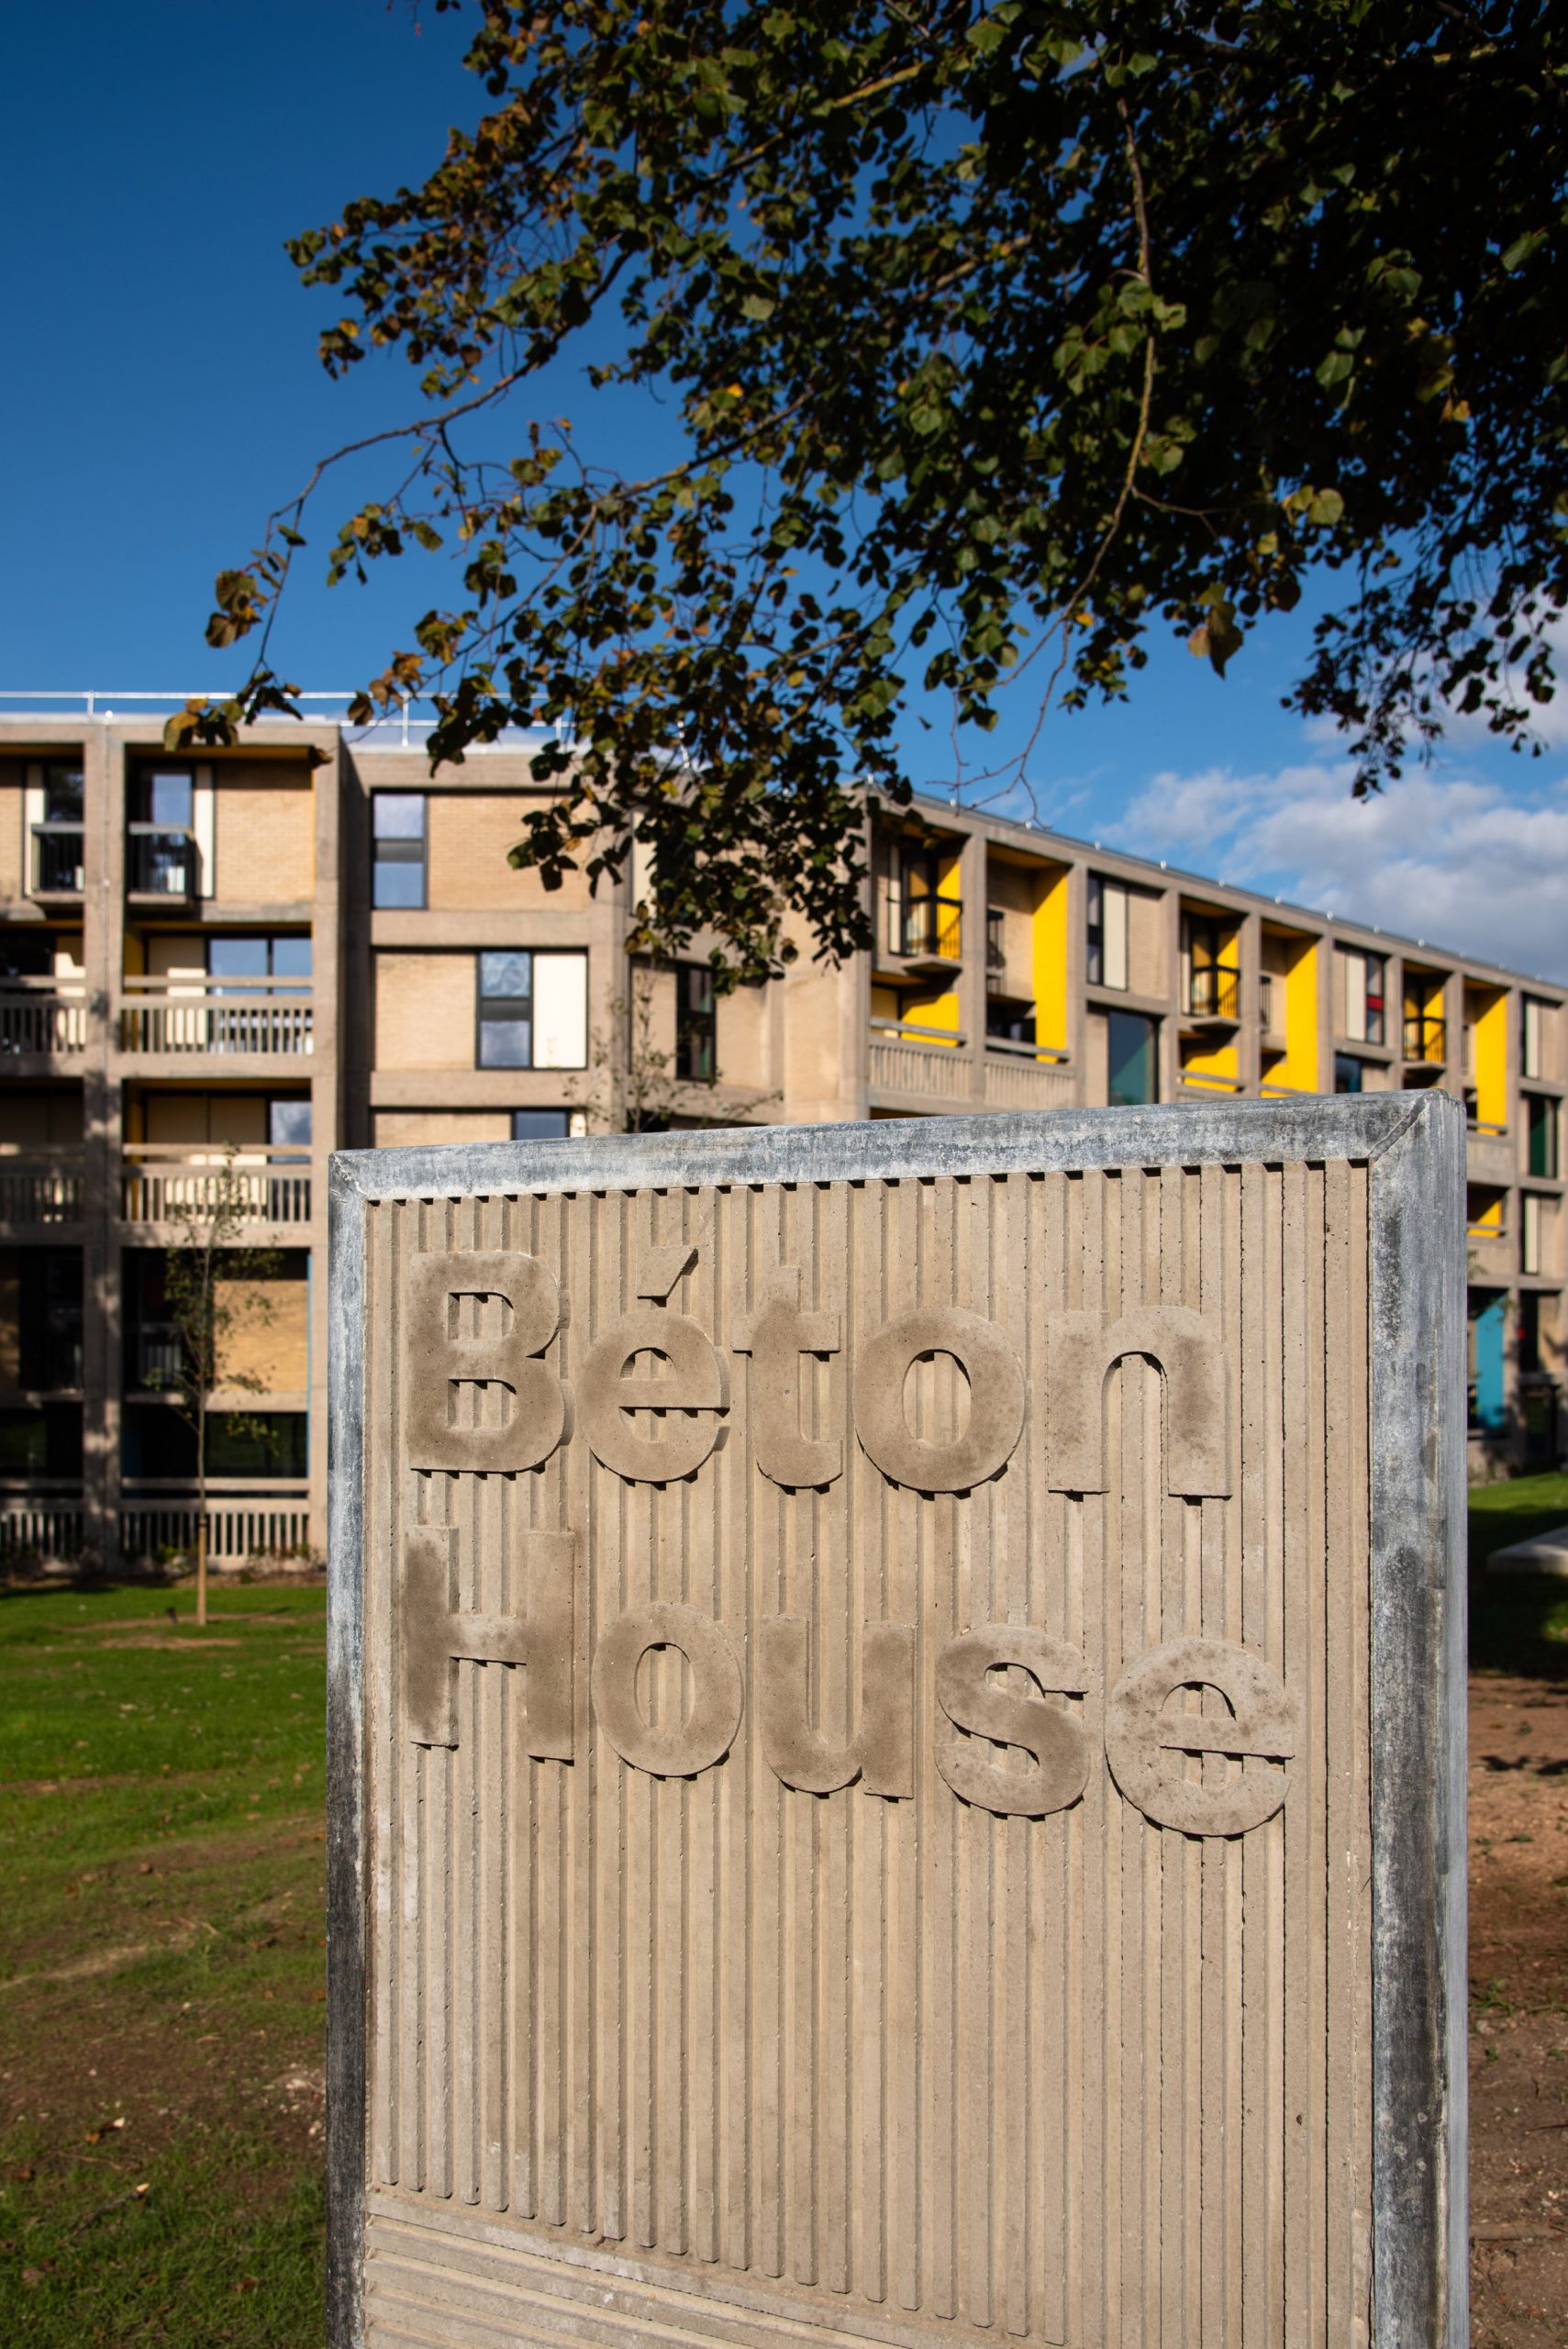 Sign outside Béton House at Park Hill by Whittam Cox Architects